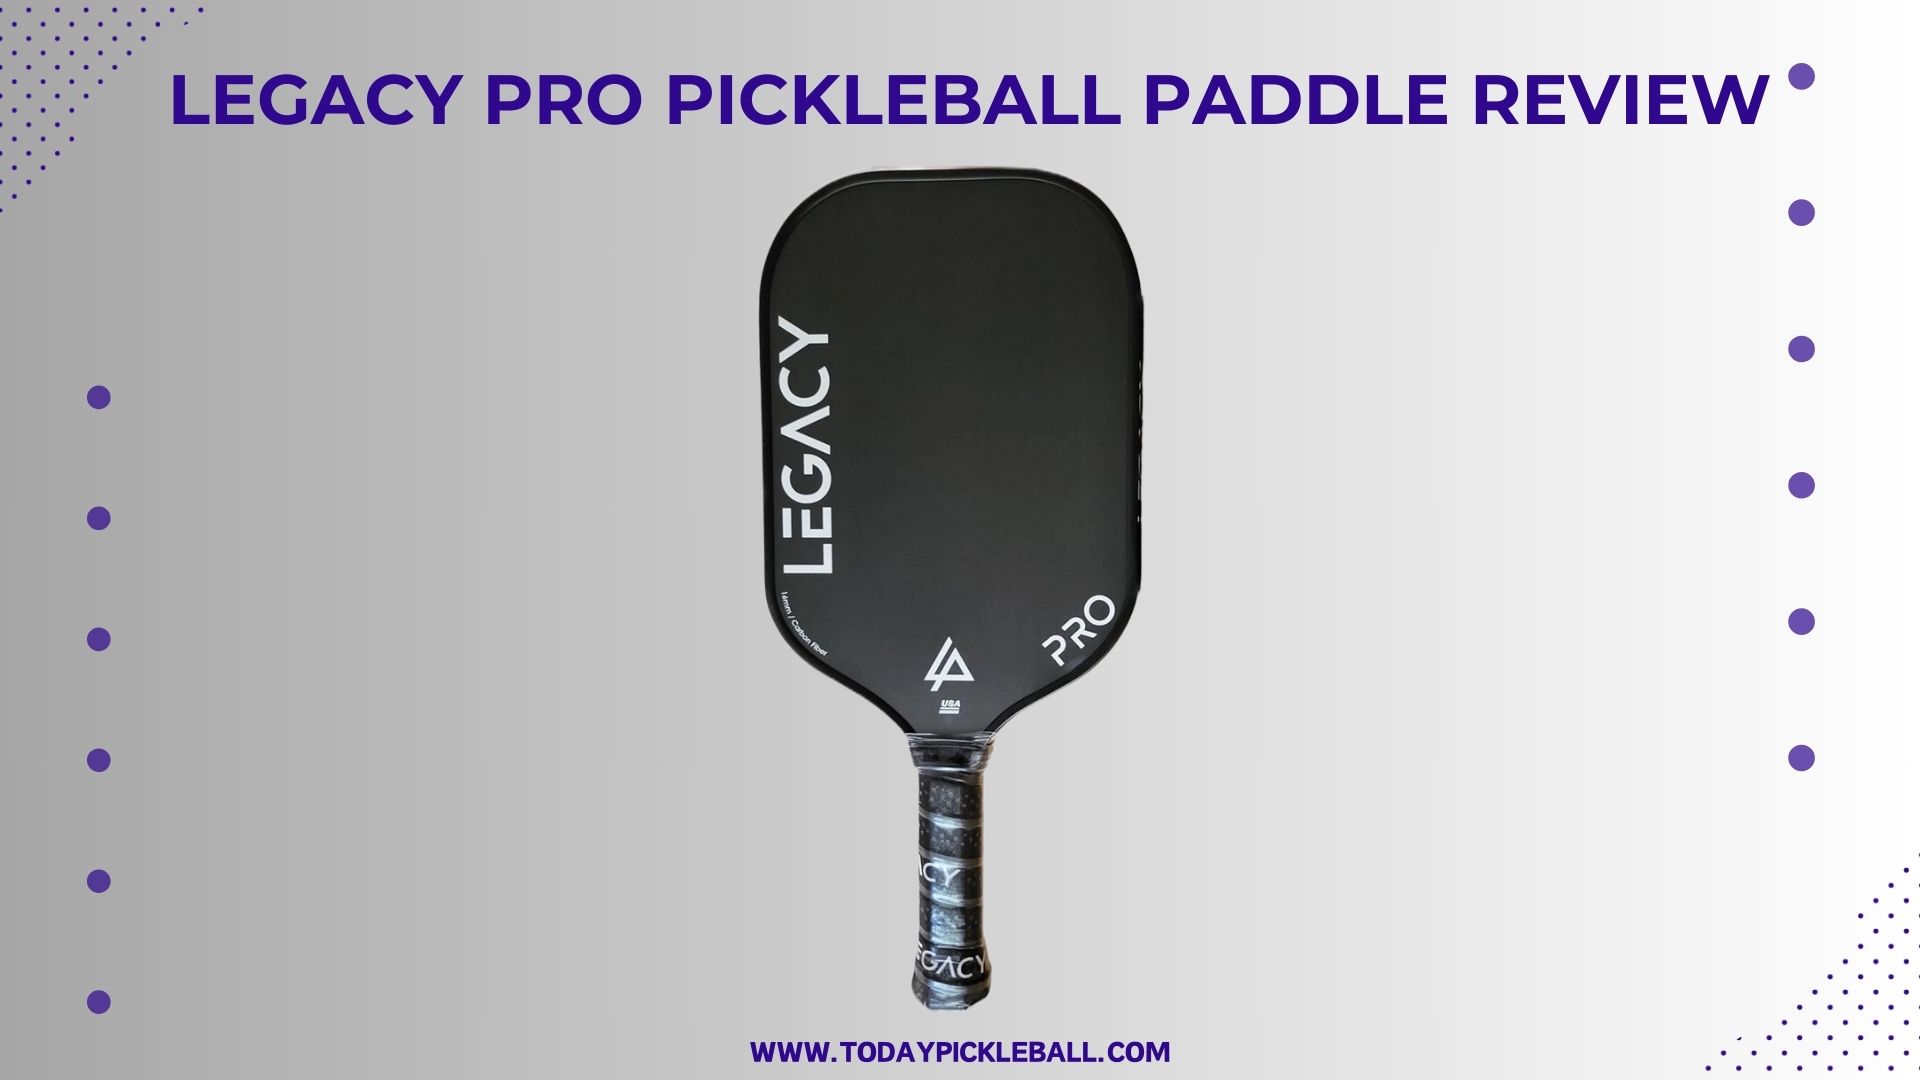 here is the image of Legacy Pro paddle to give a hand review about Legacy Pro Pickleball Paddle Review